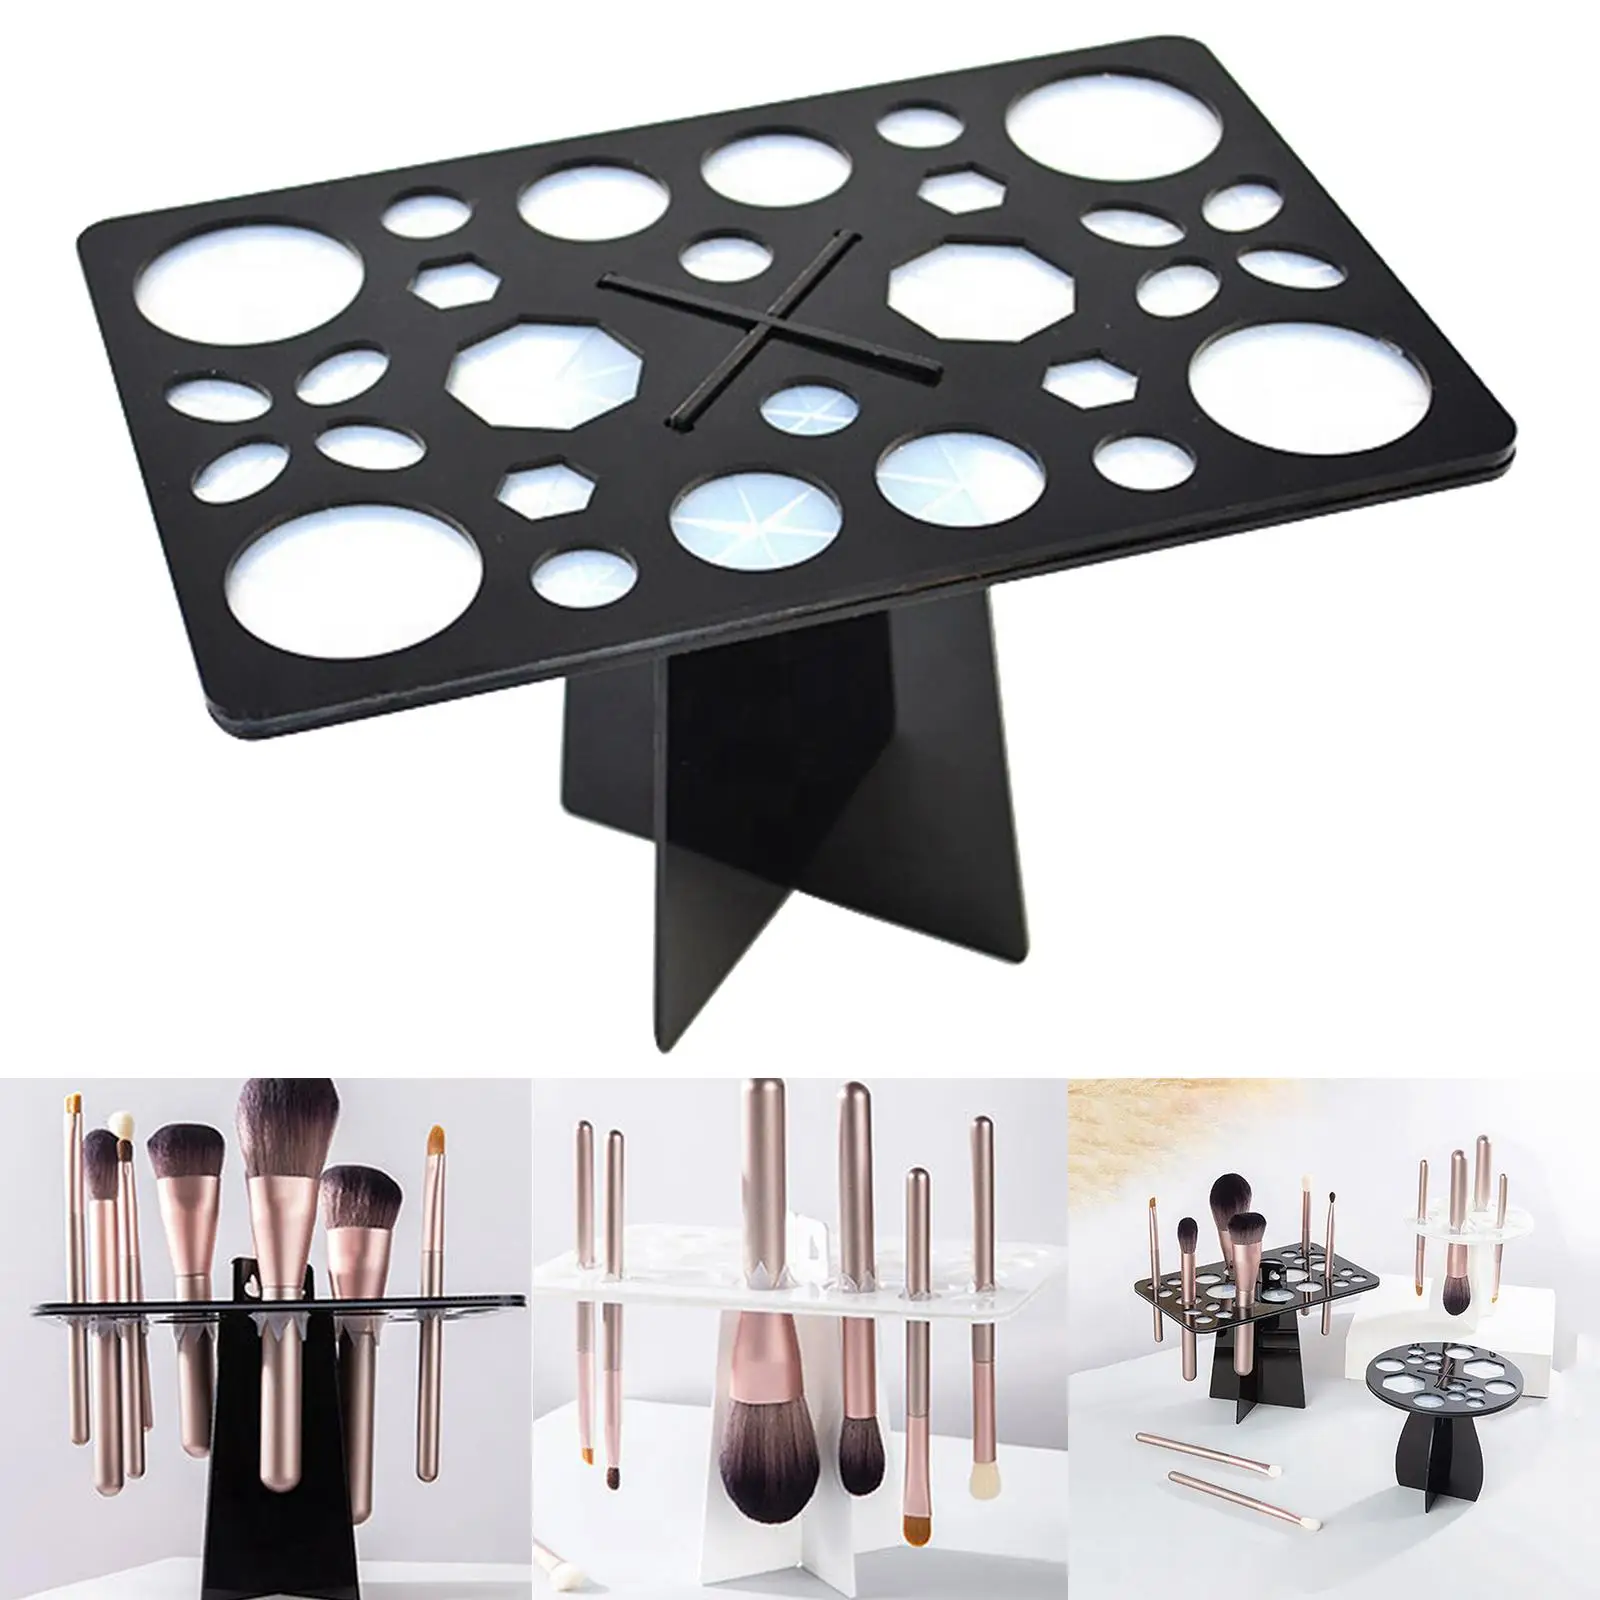 Makeup Brushes Drying Rack Removable with Various Sizes Holes Collapsible